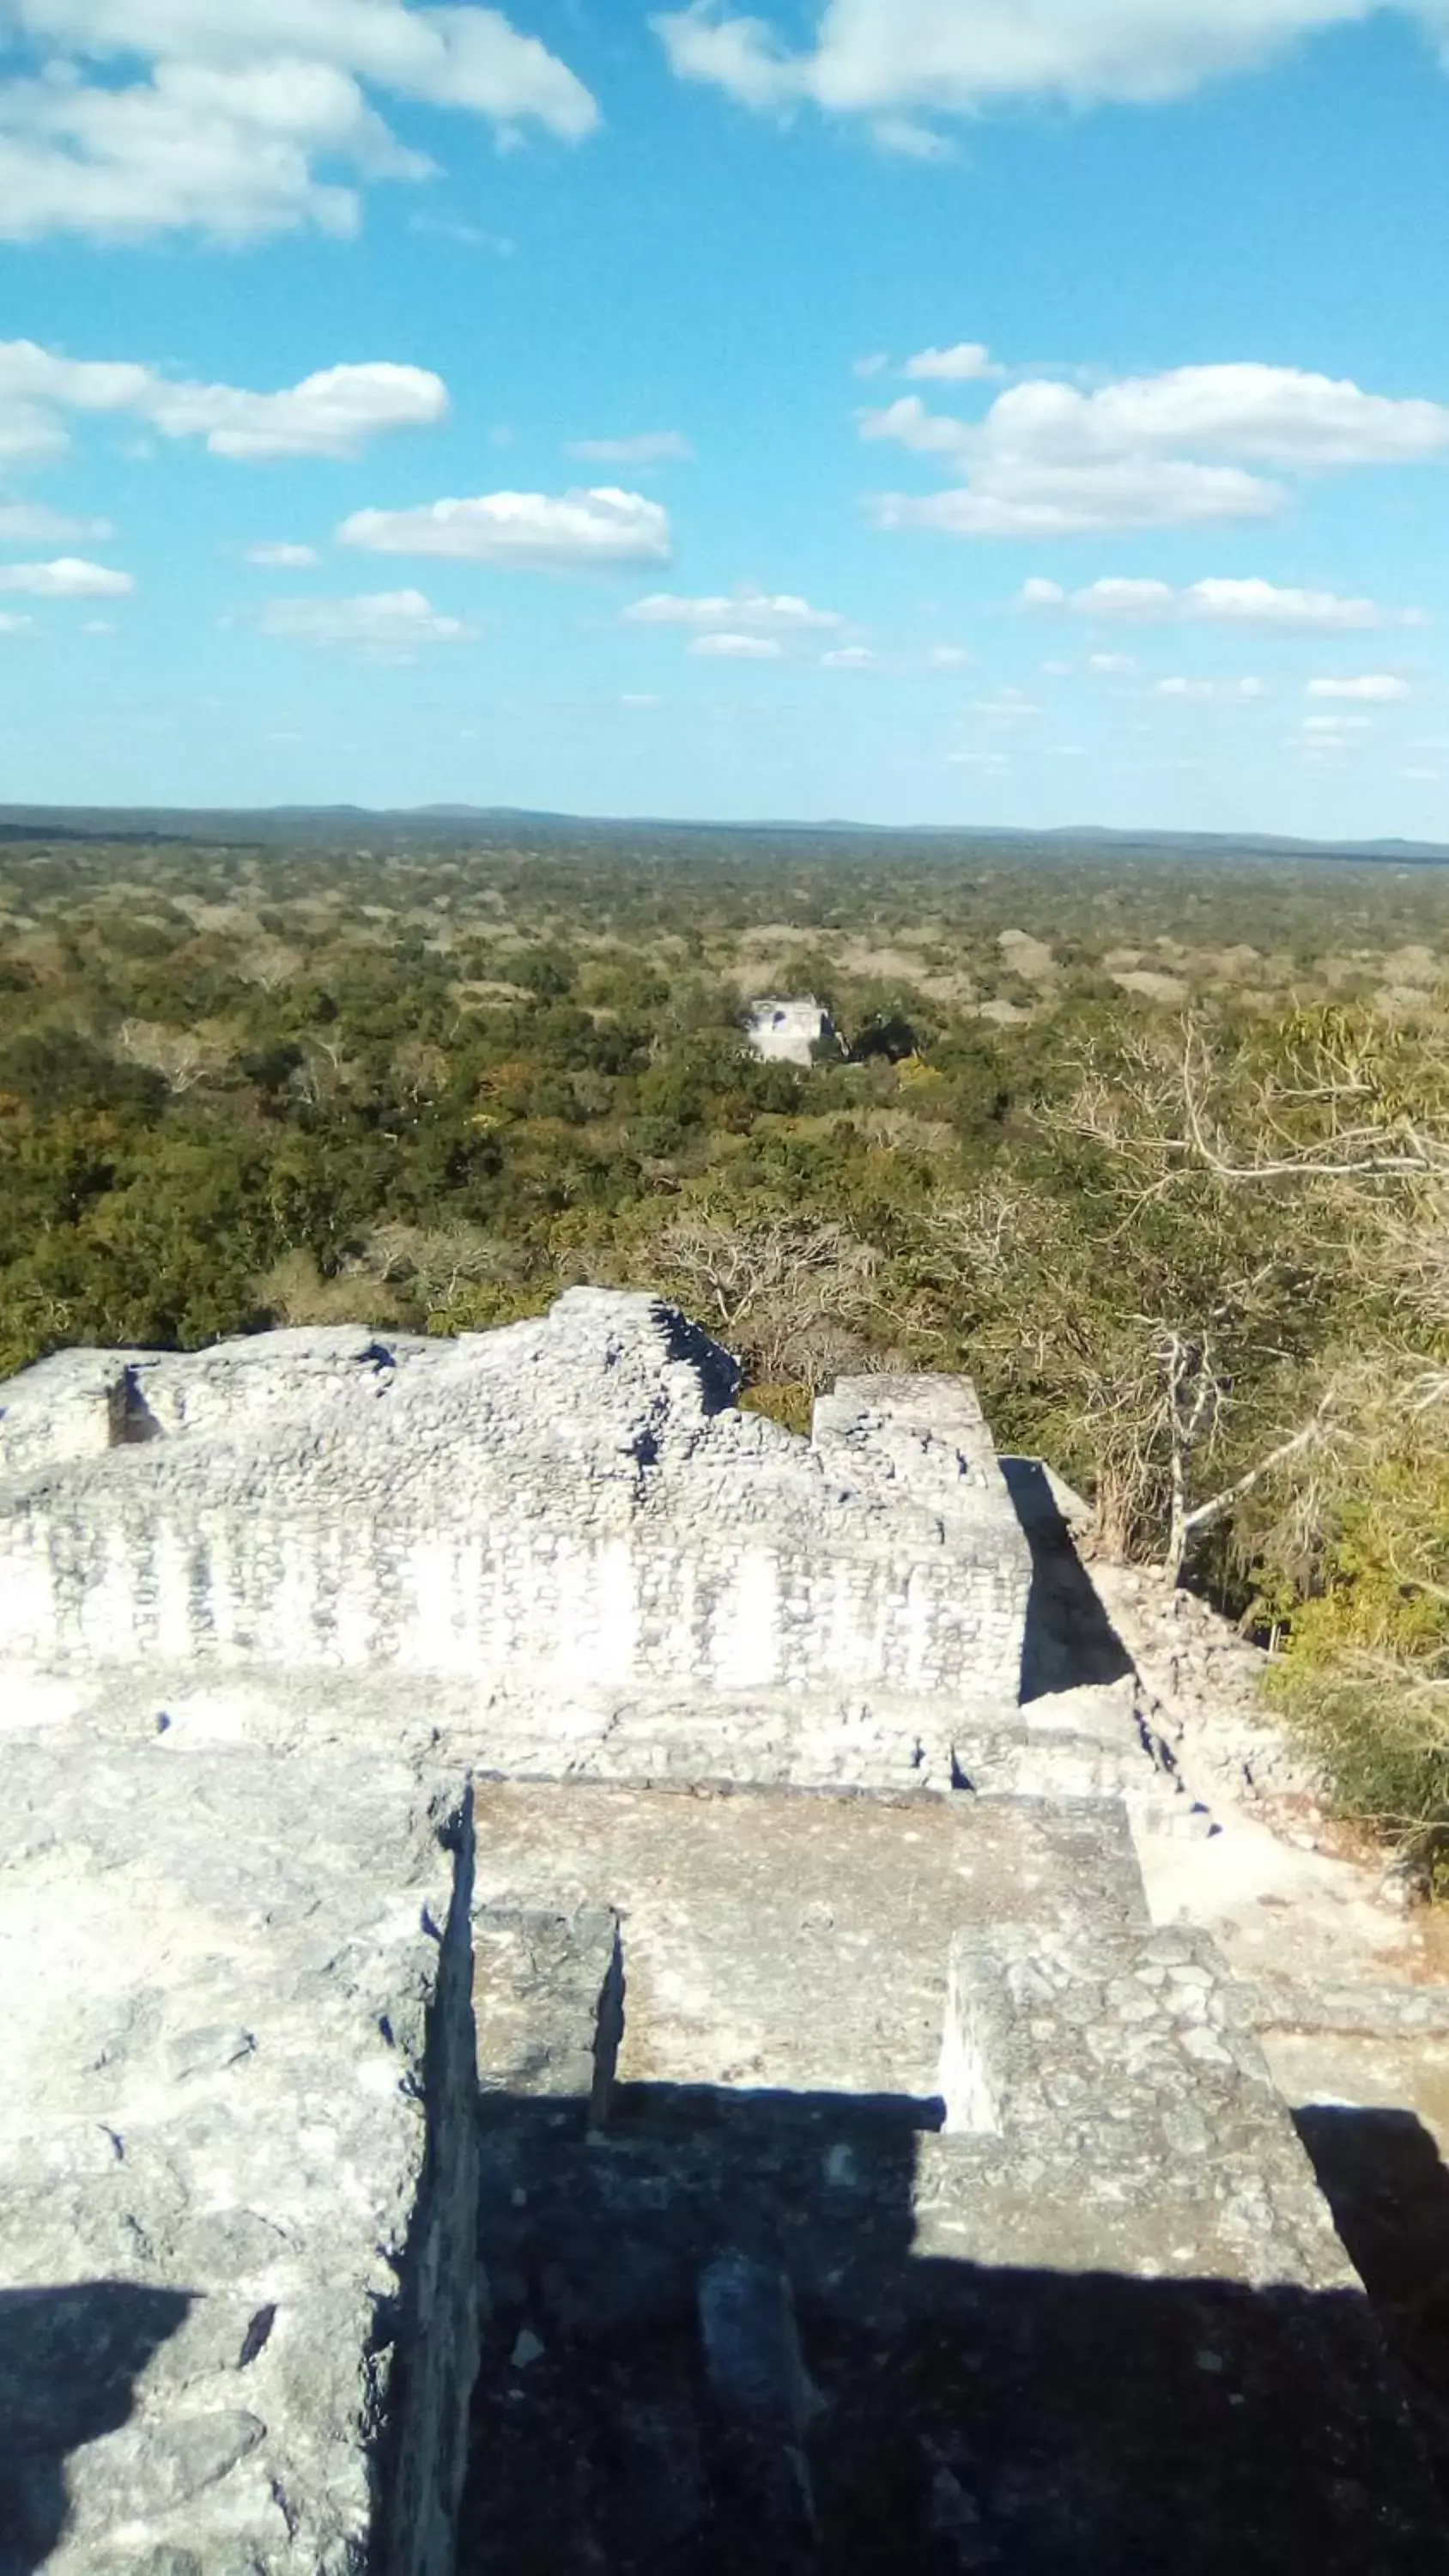 Activities in Hotel Chaac Calakmul